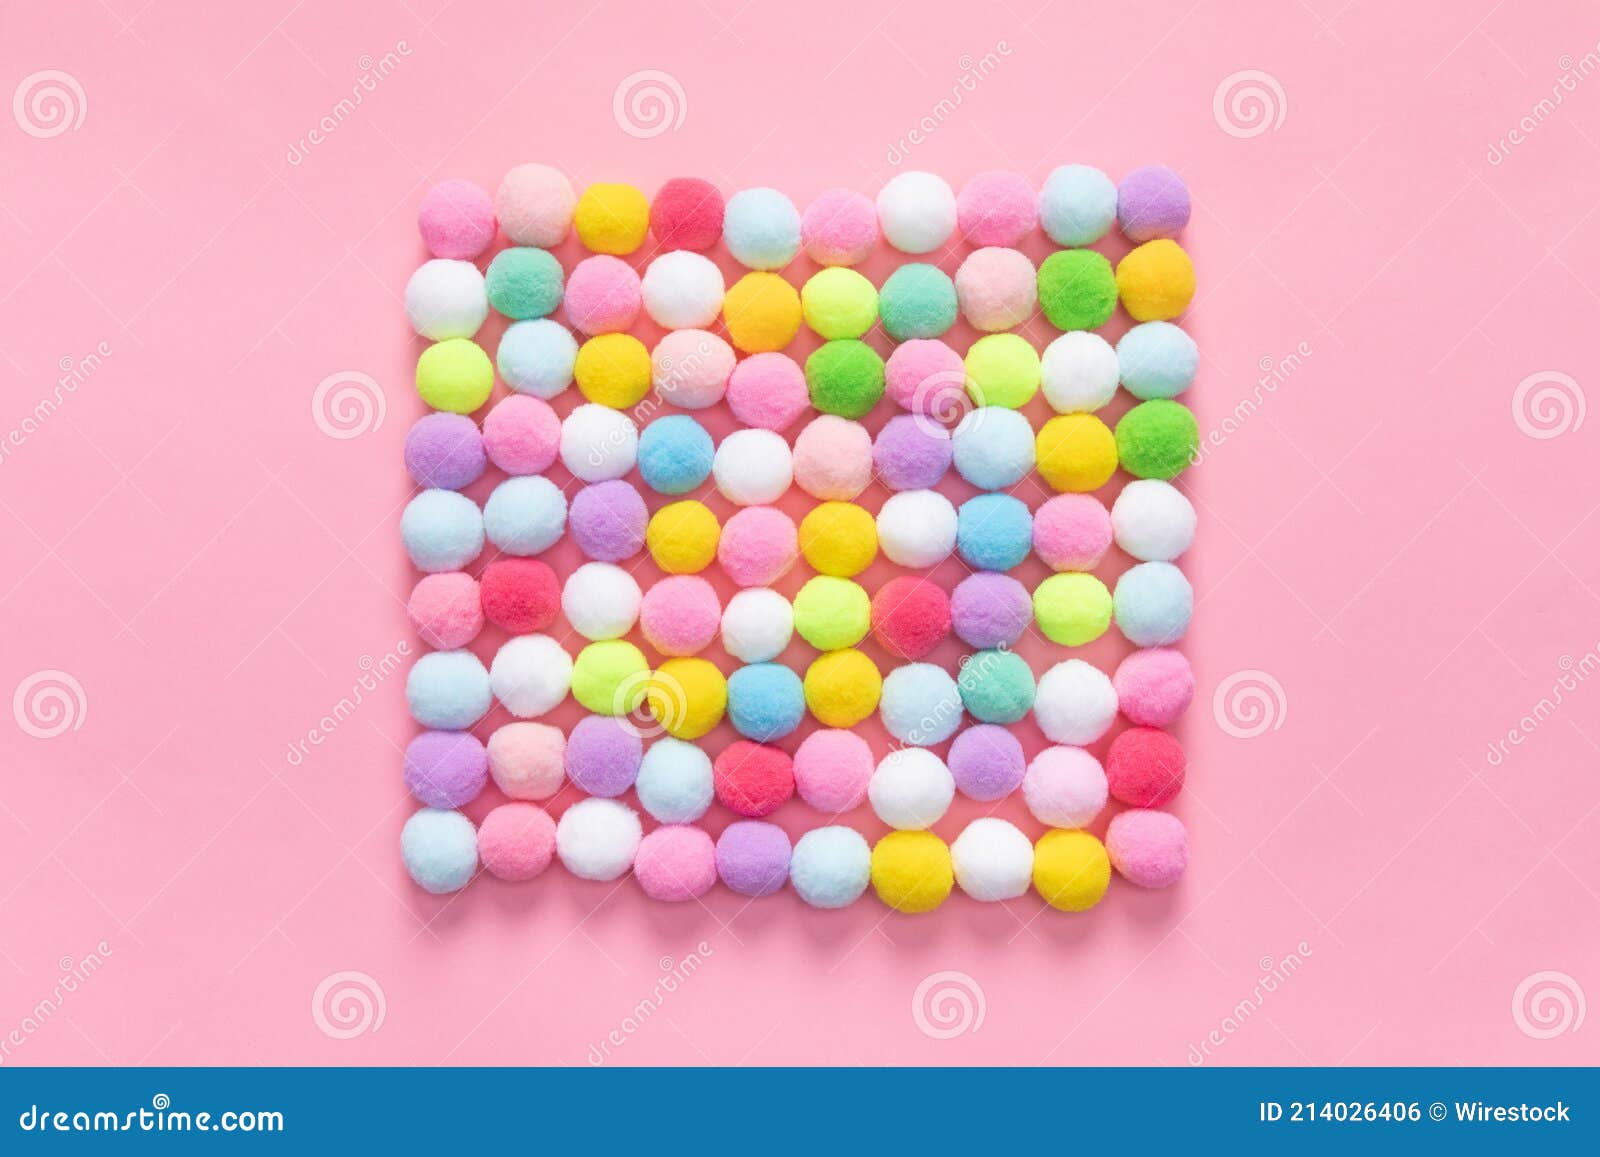 Top View of Colorful Pom Pom Balls Forming a Square Shape on Pink  Background Stock Photo - Image of object, objects: 214026406